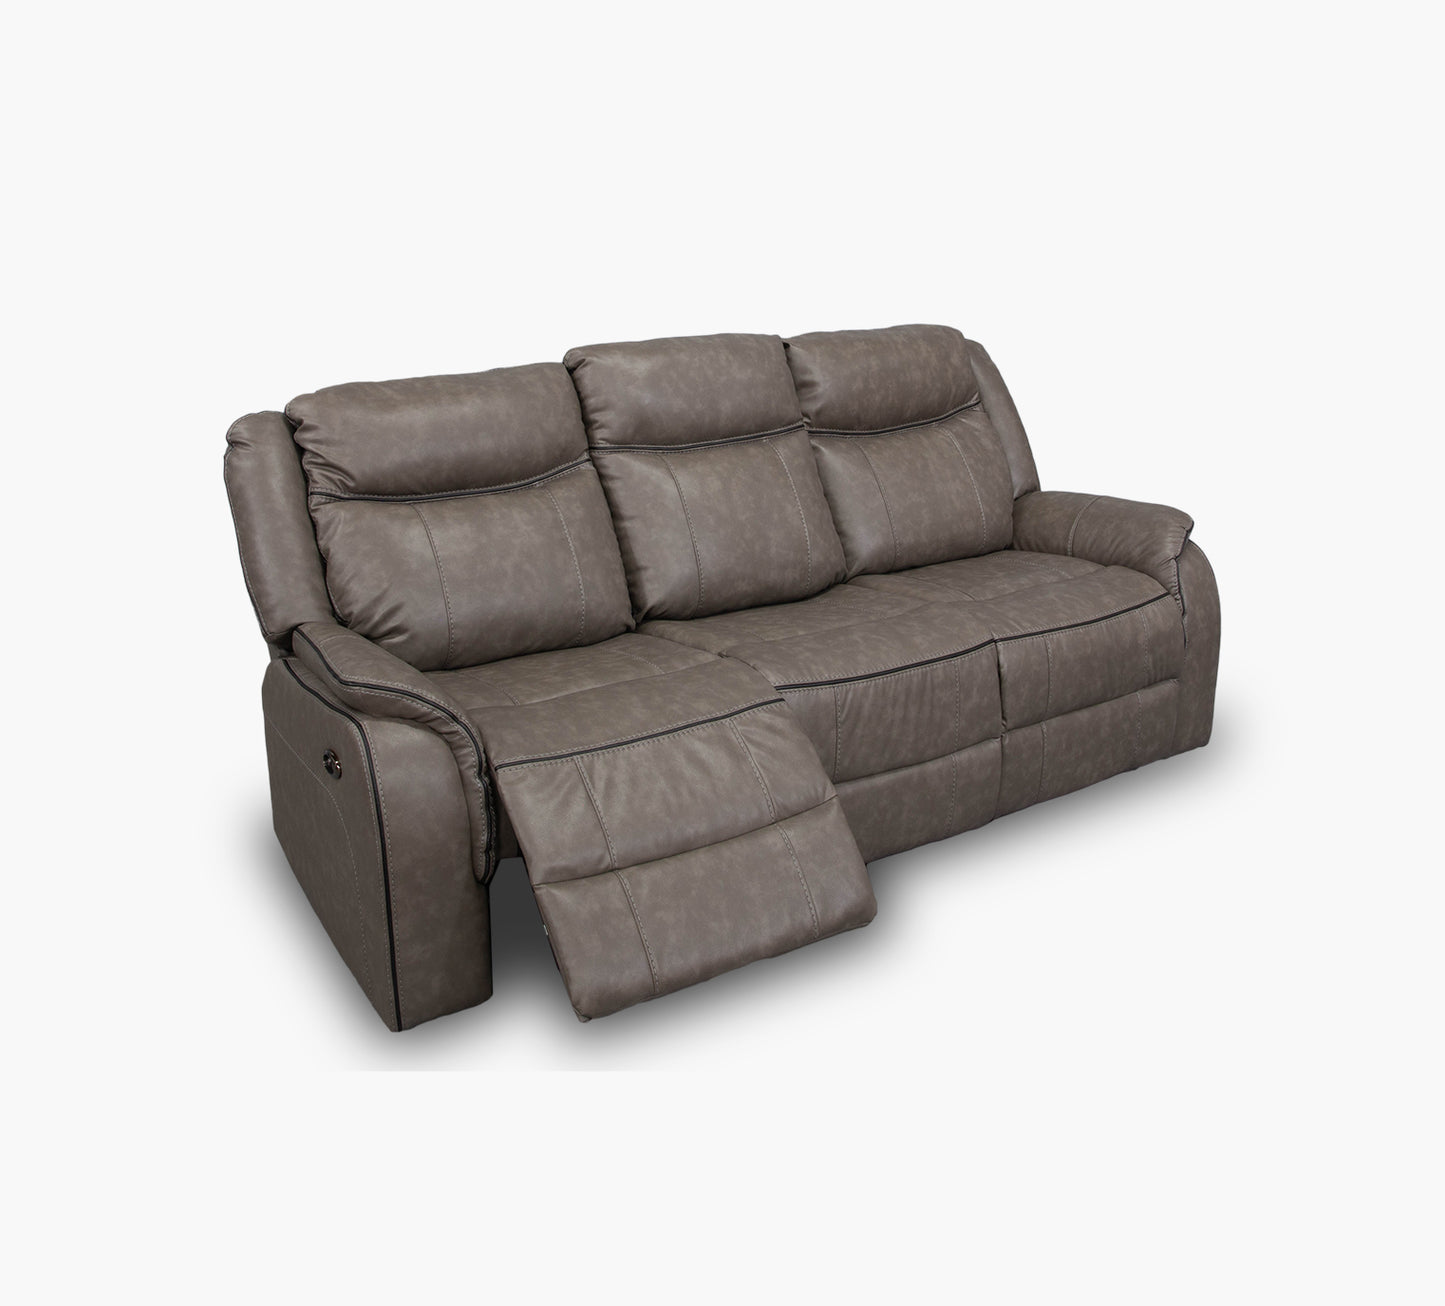 Scorpion Power Reclining Sofa with Drop Down Table